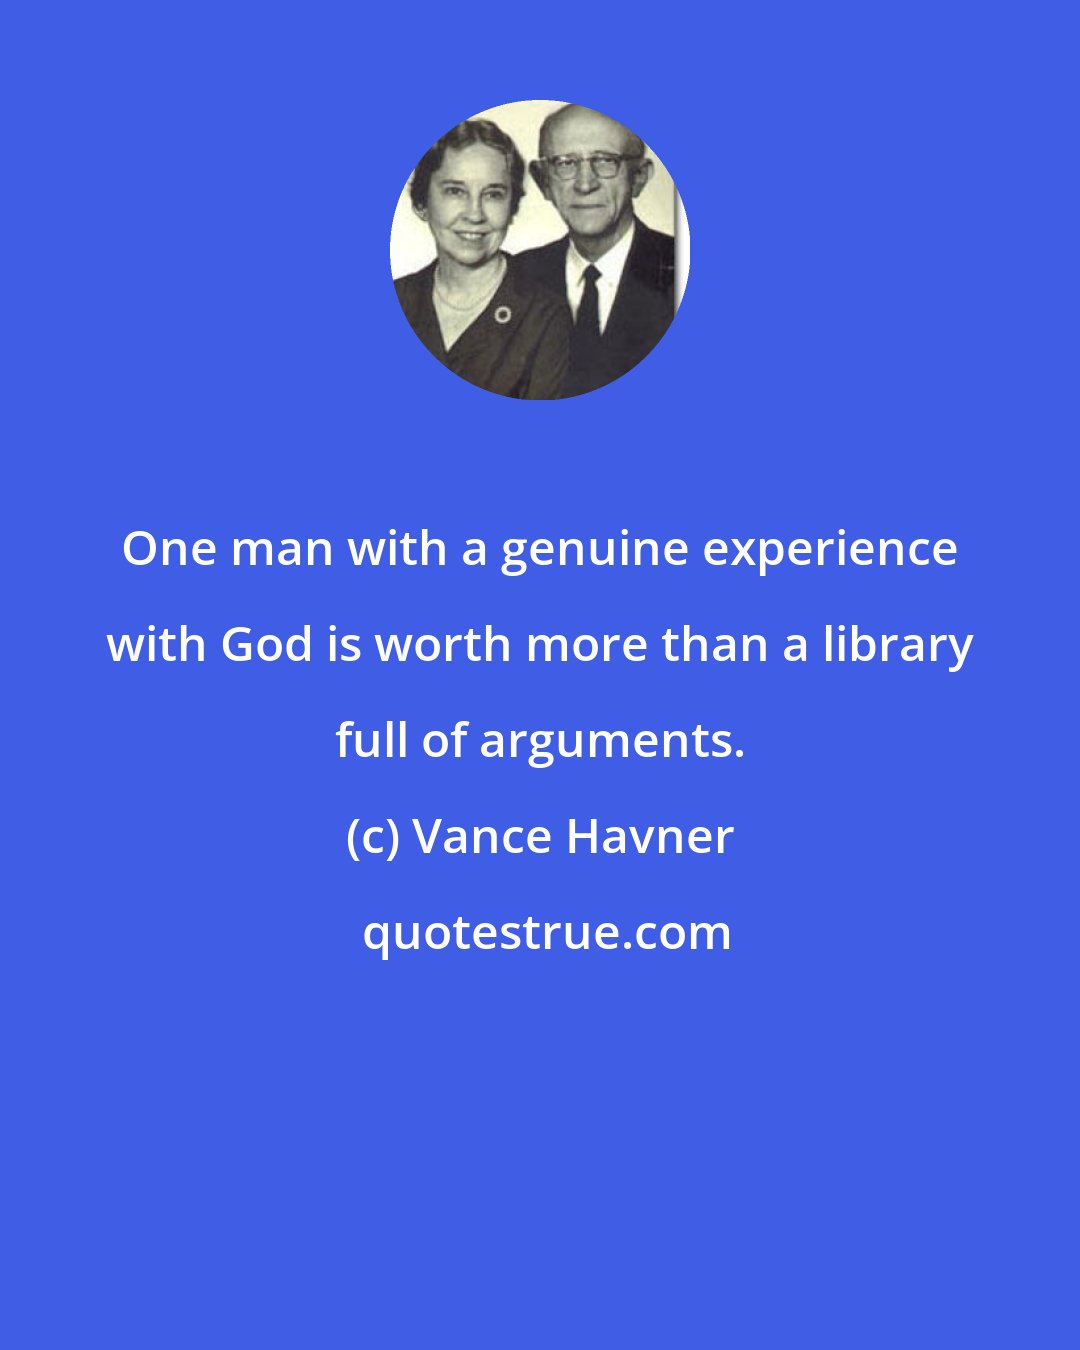 Vance Havner: One man with a genuine experience with God is worth more than a library full of arguments.